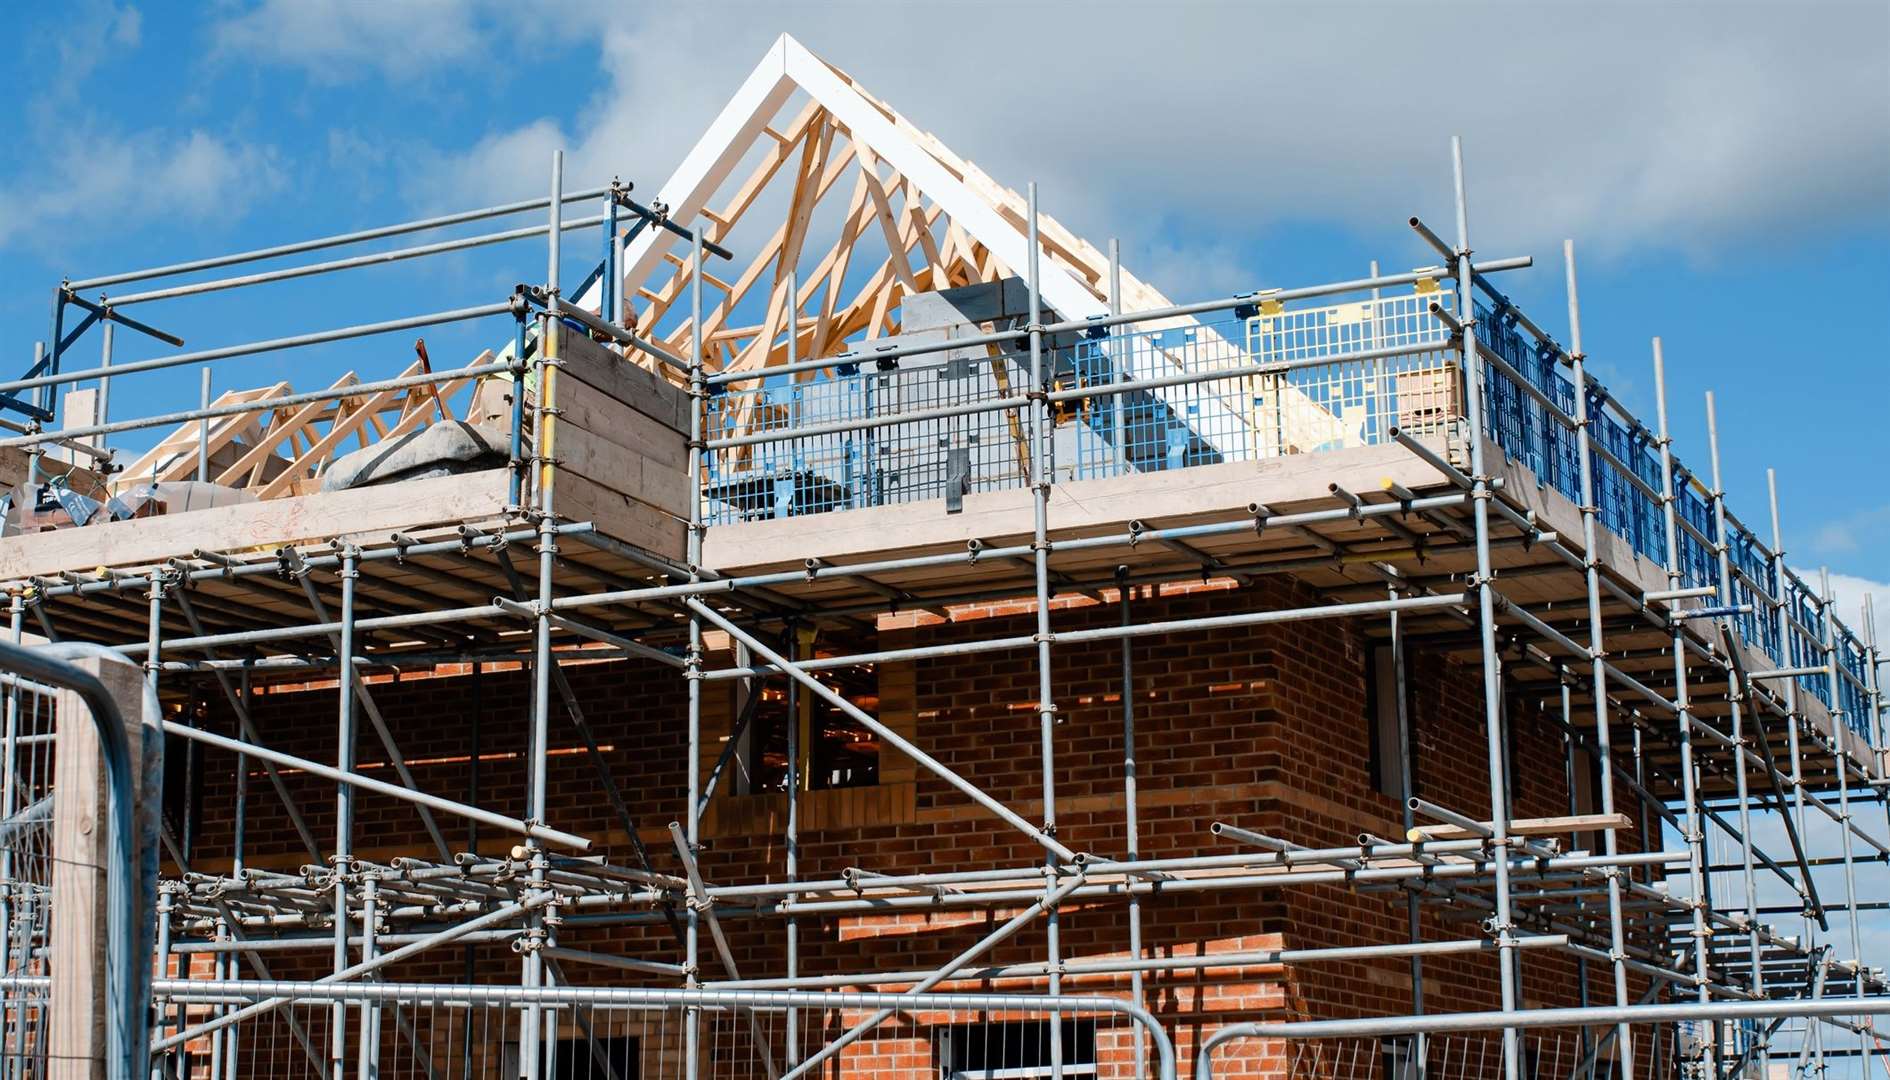 The county could be building 230,000 new homes over the next 25 years